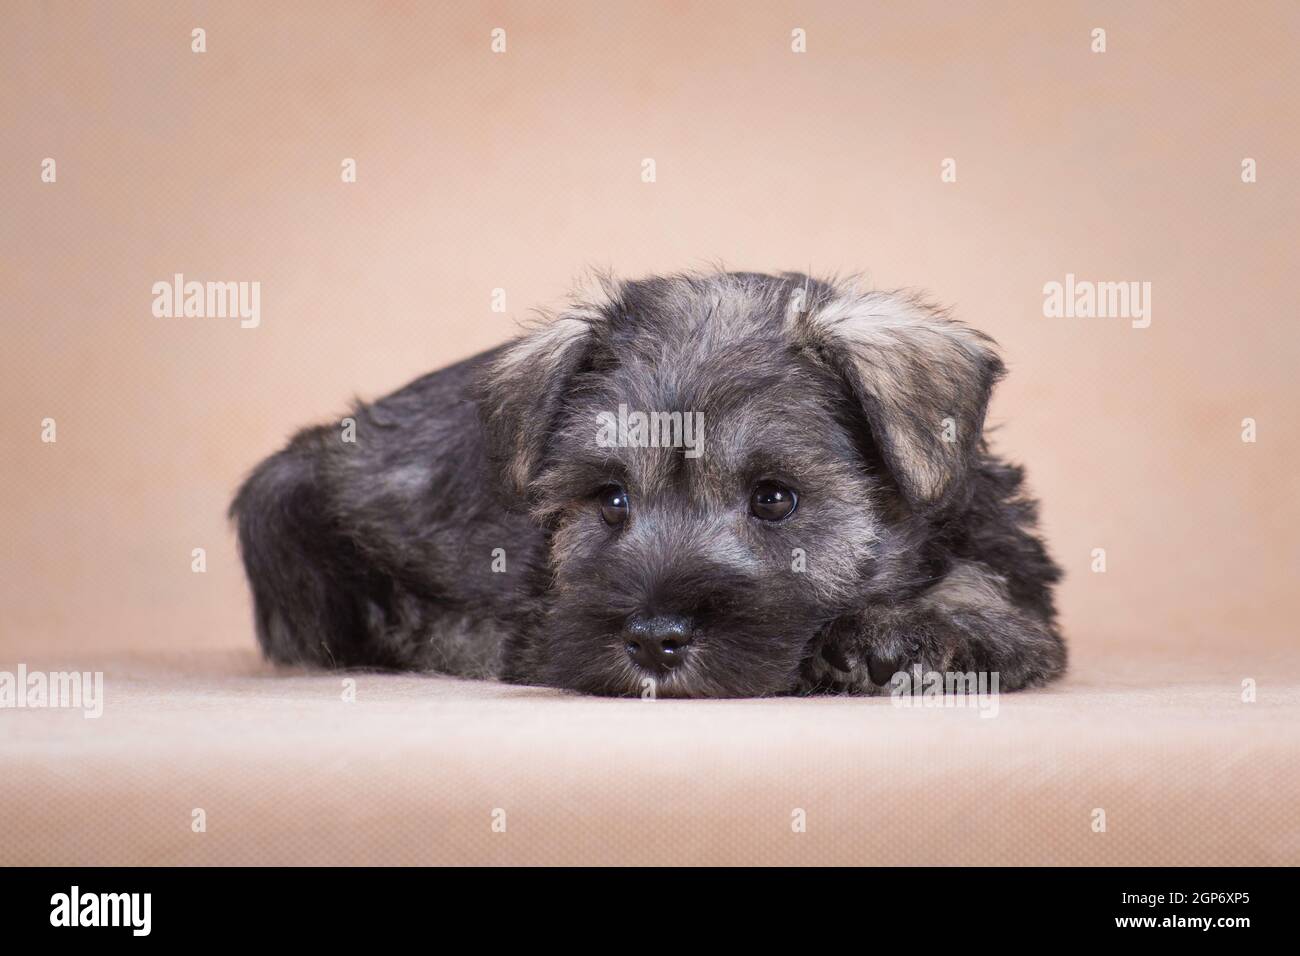 A small, colored pepper and salt, a puppy of the miniature schnauzer breed lies on a beige background, indoors, in the studio Stock Photo